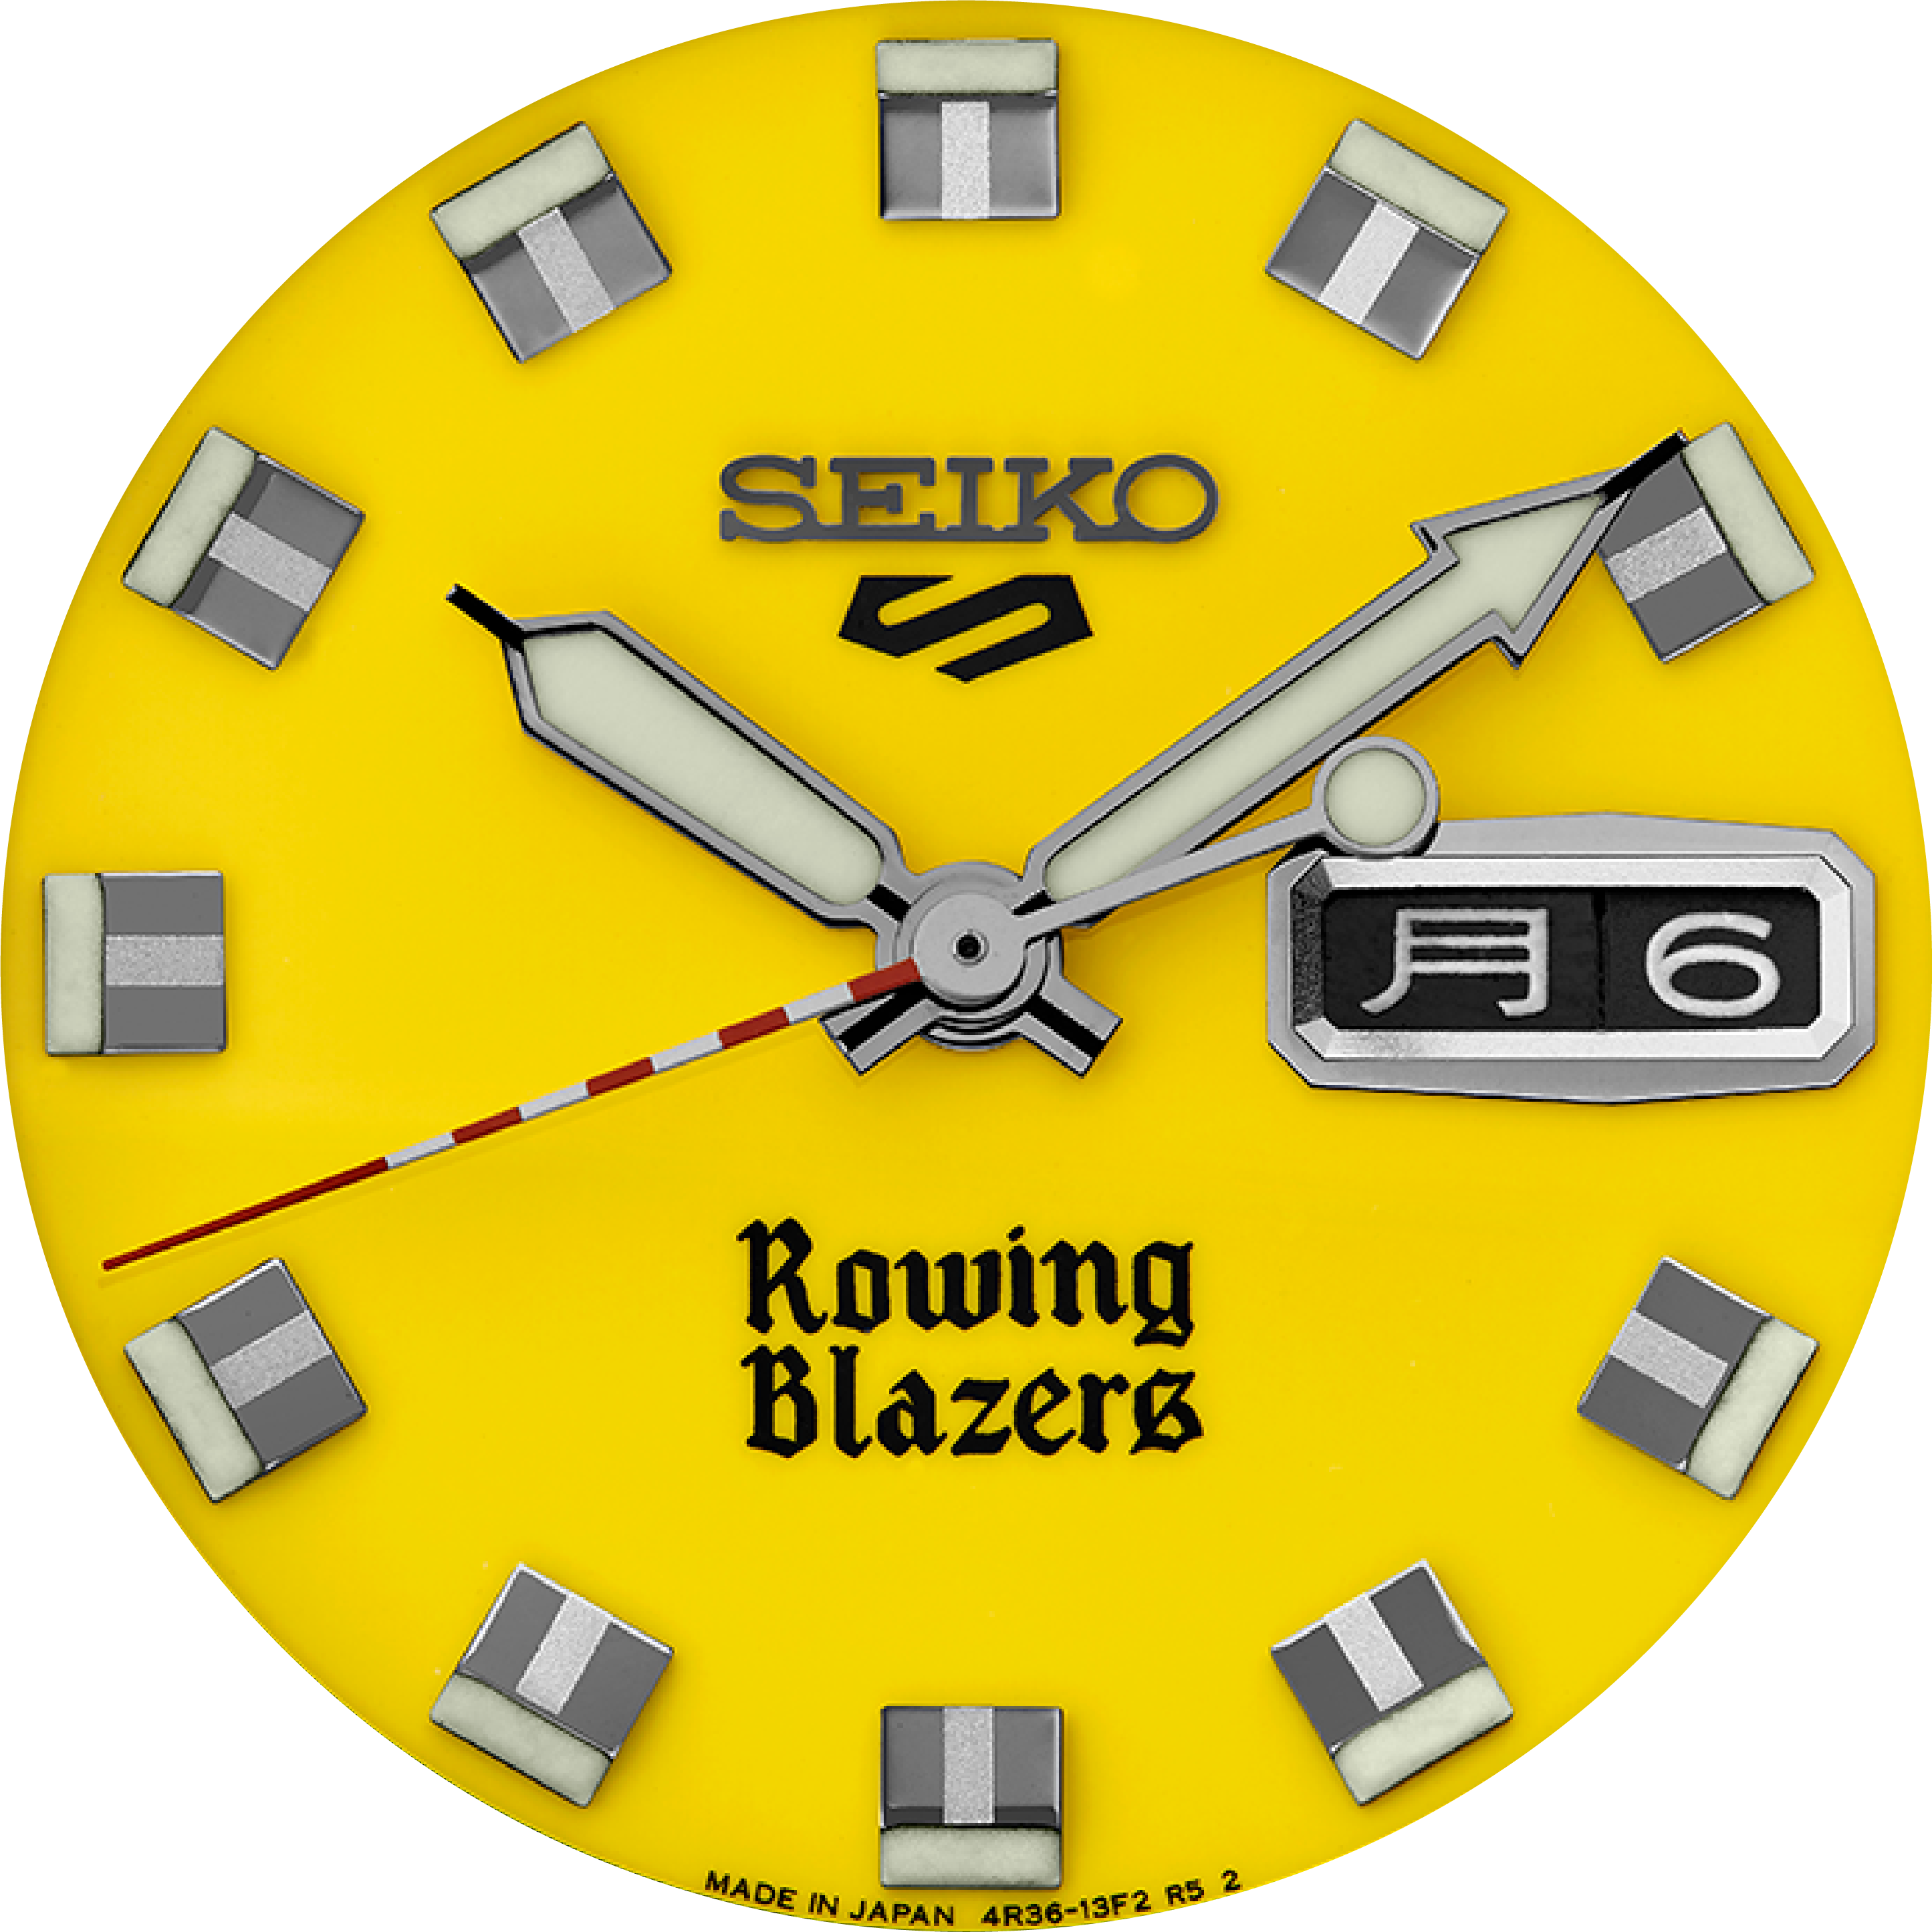 rowing blazers DIAL DETAILS